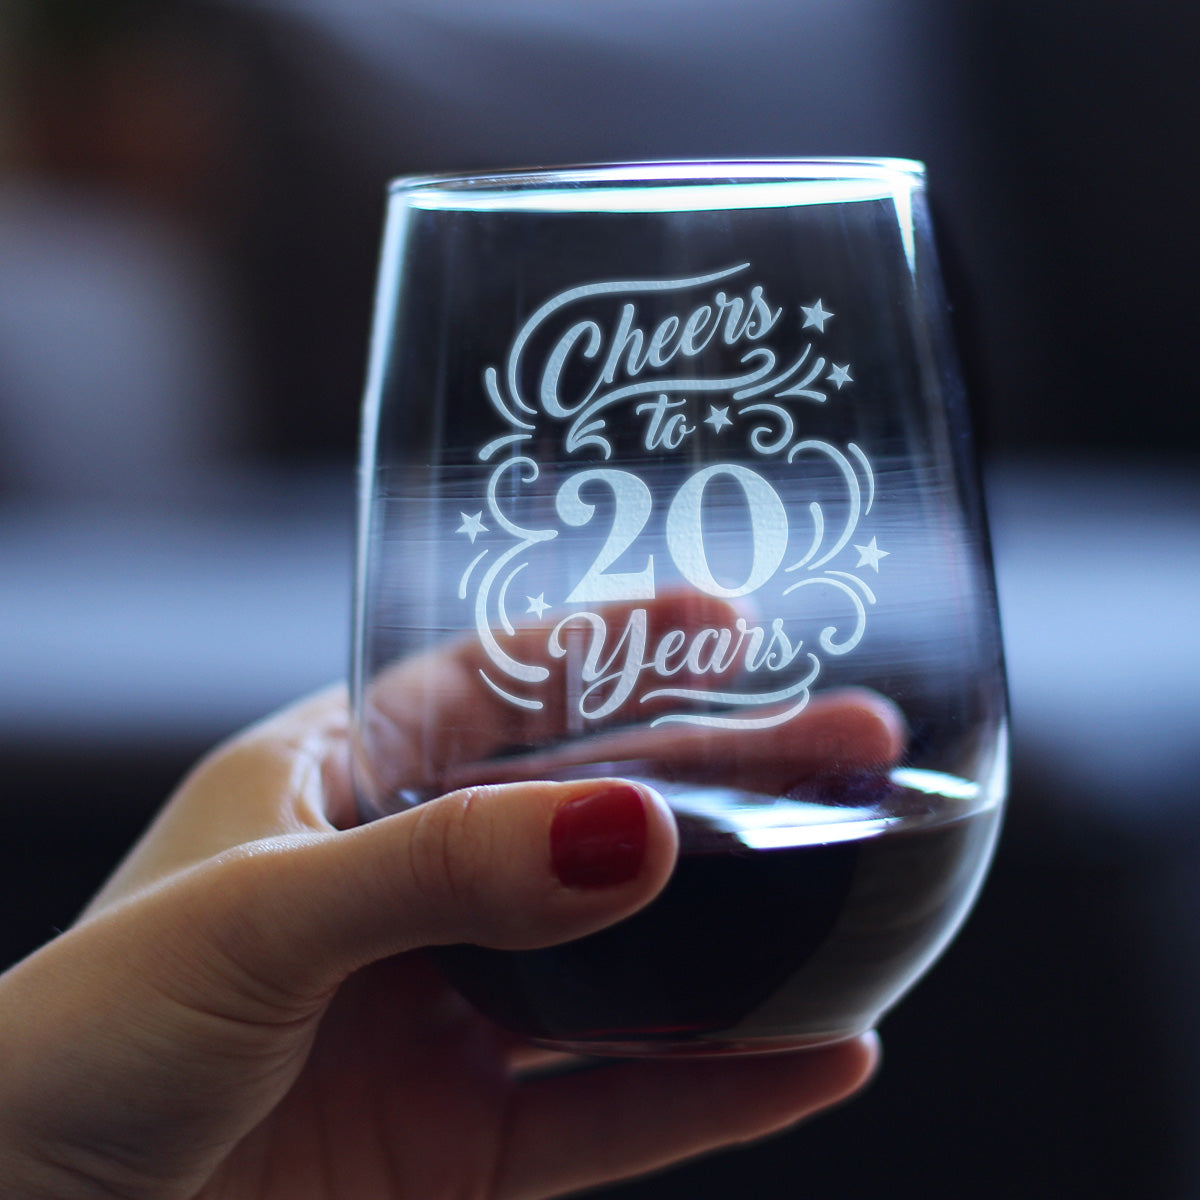 Cheers to 20 Years - Stemless Wine Glass Gifts for Women &amp; Men - 20th Anniversary or Birthday Party Decor - Large Glasses